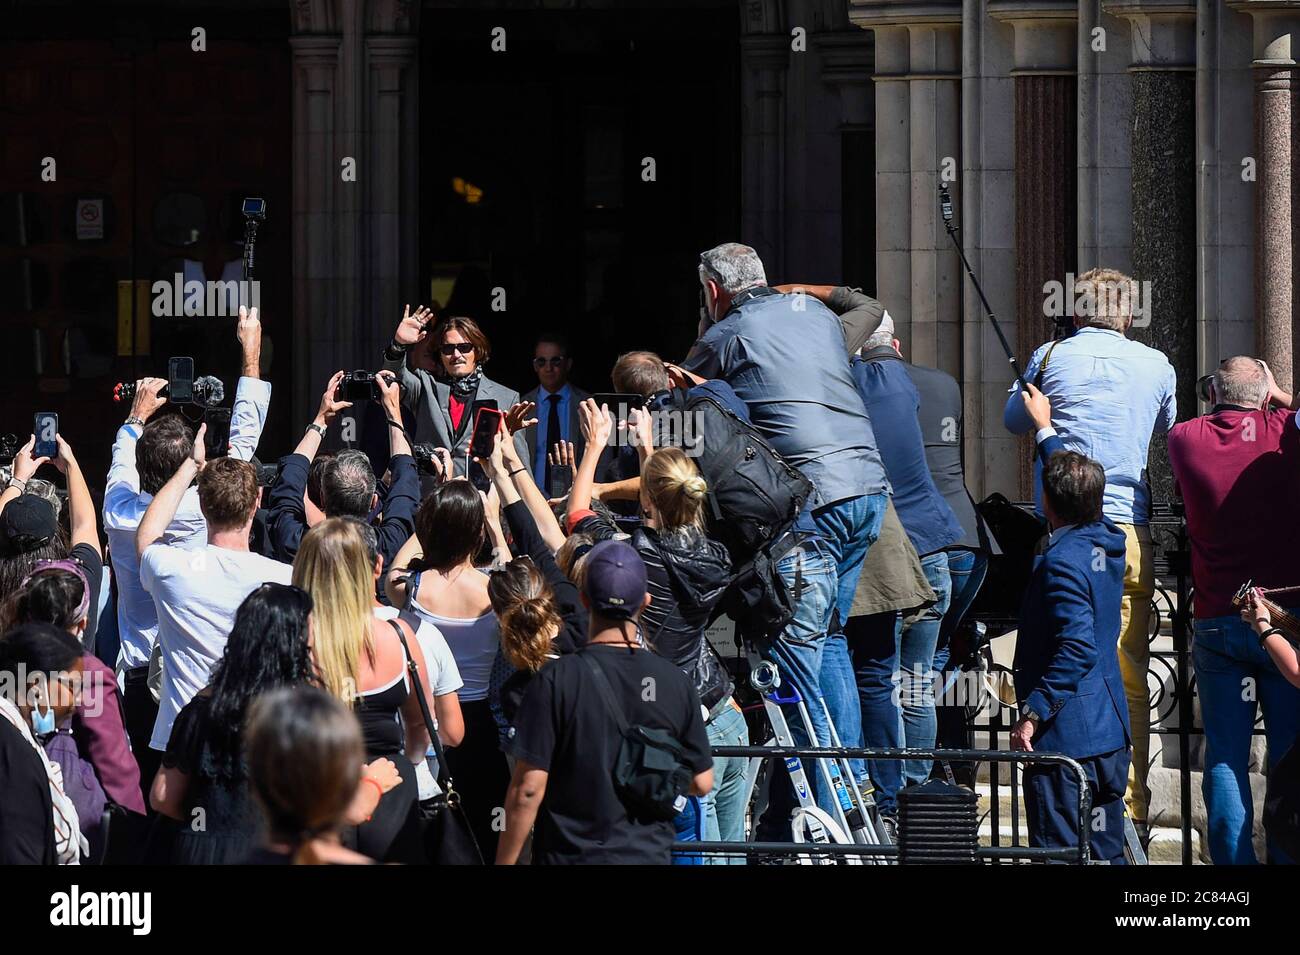 London, UK.  21 July 2020.  Johnny Depp, Hollywood actor, arrives at the High Court to attend his libel case.  Mr Depp is suing The Sun newspaper’s publisher News Group Newspaper, as well as executive editor Dan Wootton, for calling him a ‘wife beater’ in 2018. Mr Depp also that claims allegations of violence against Heard are untrue.  The case continues.  Credit: Stephen Chung / Alamy Live News Stock Photo